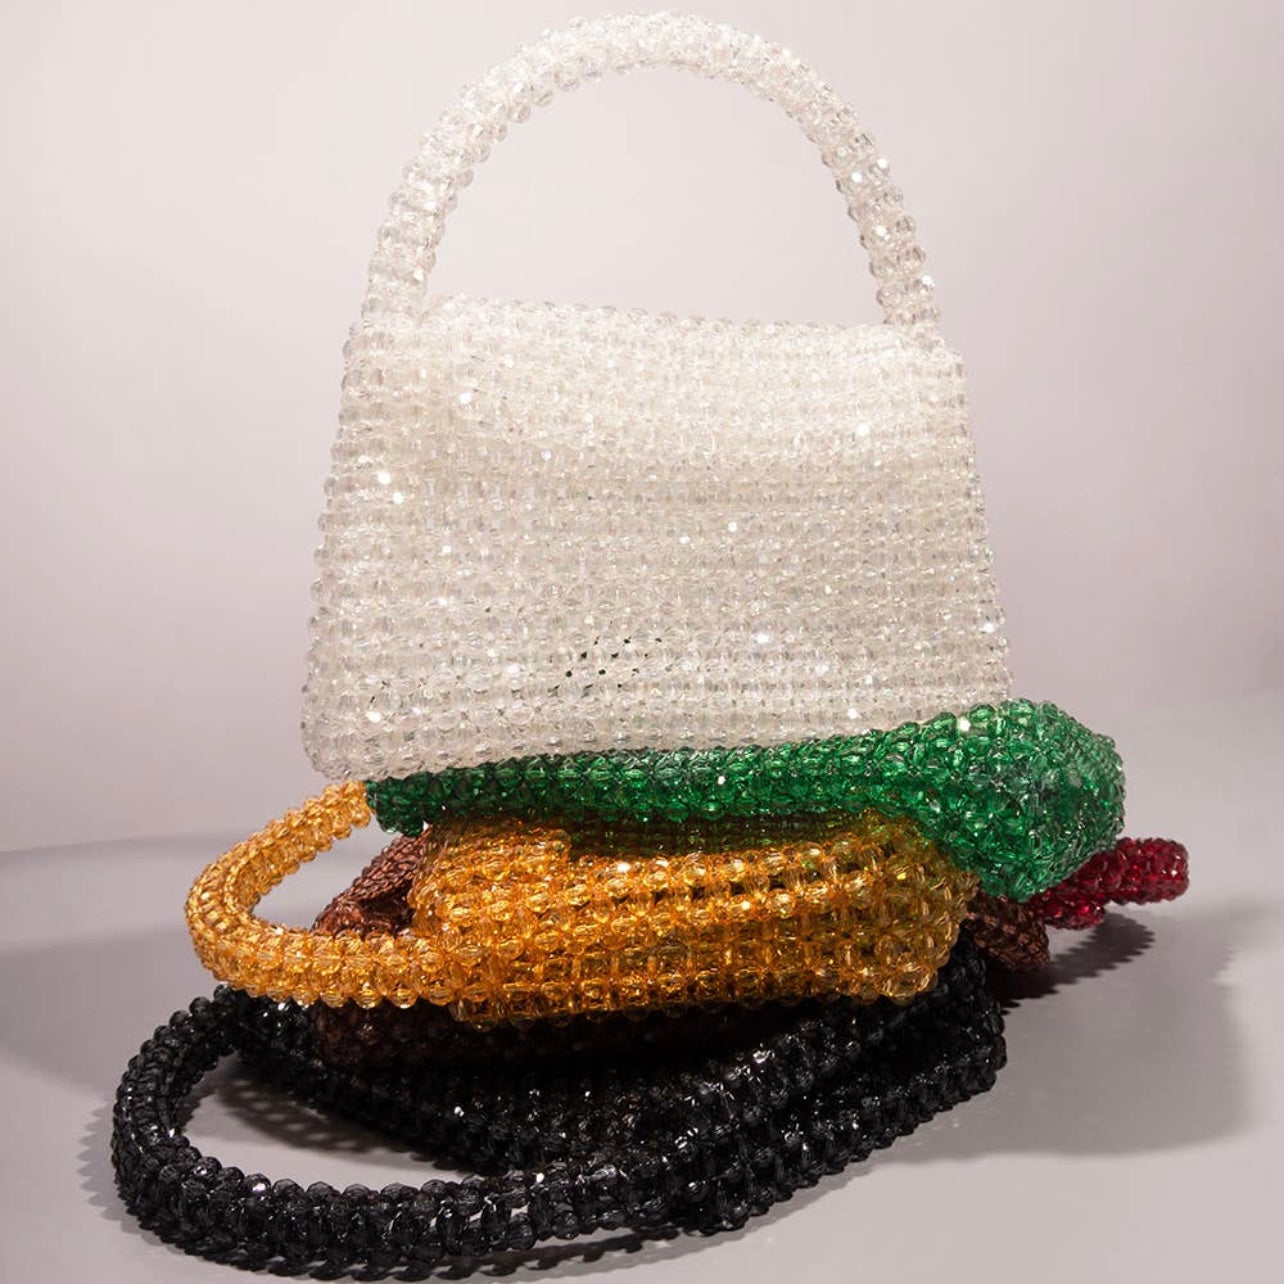 Beaded Evening Party Bag